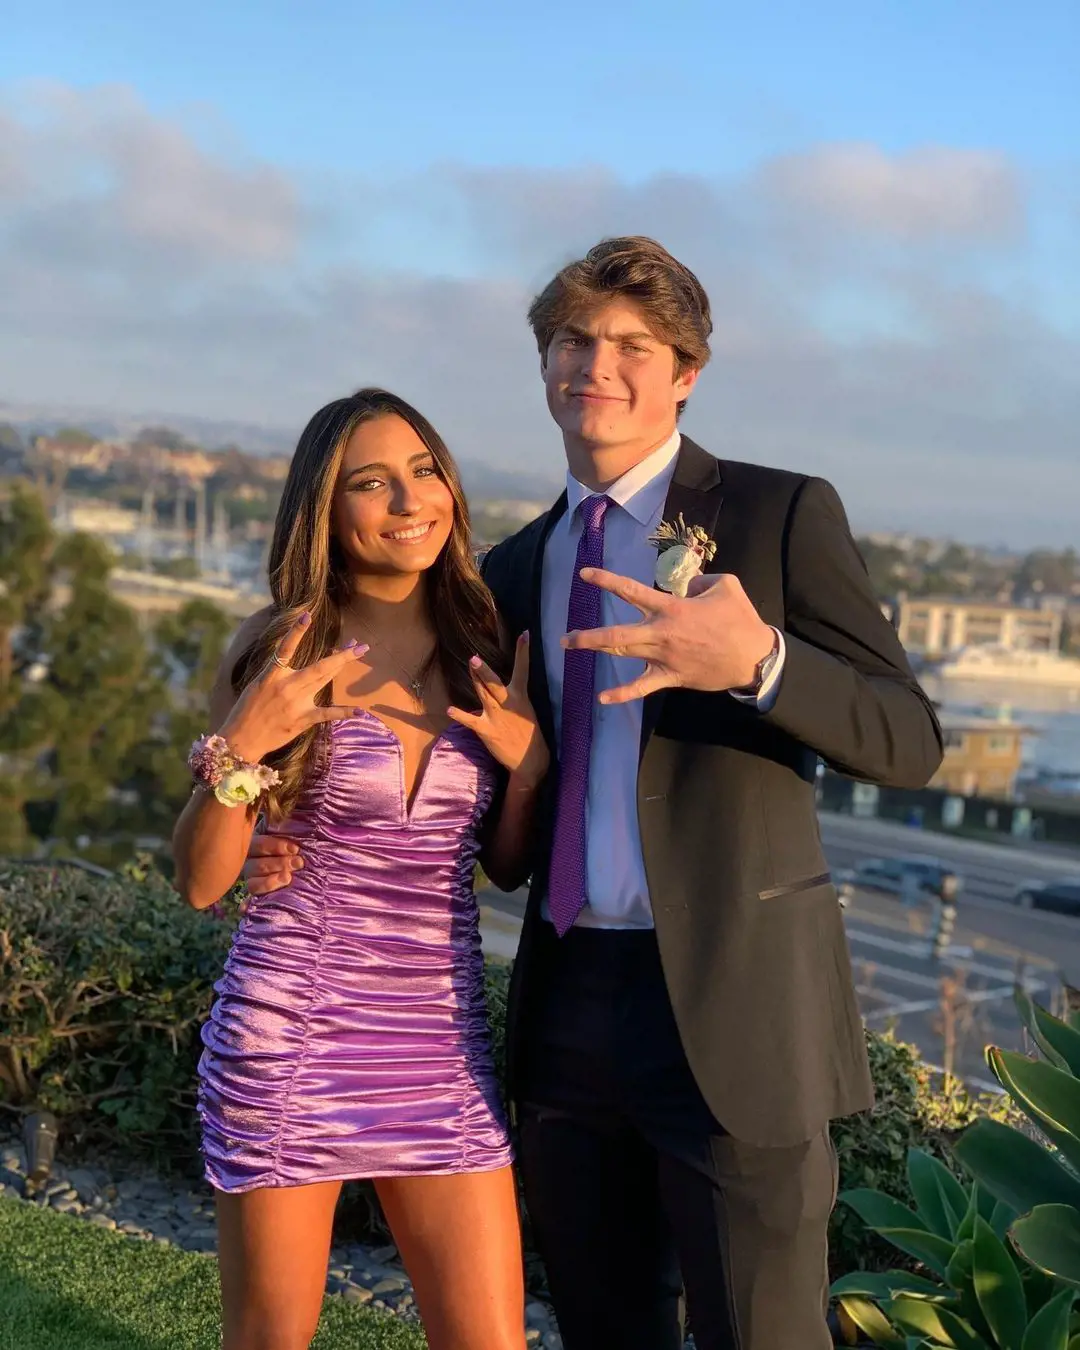 UCLA QB Ethan in college prom with Arabella Foster at Dawg Pound in February 2020.